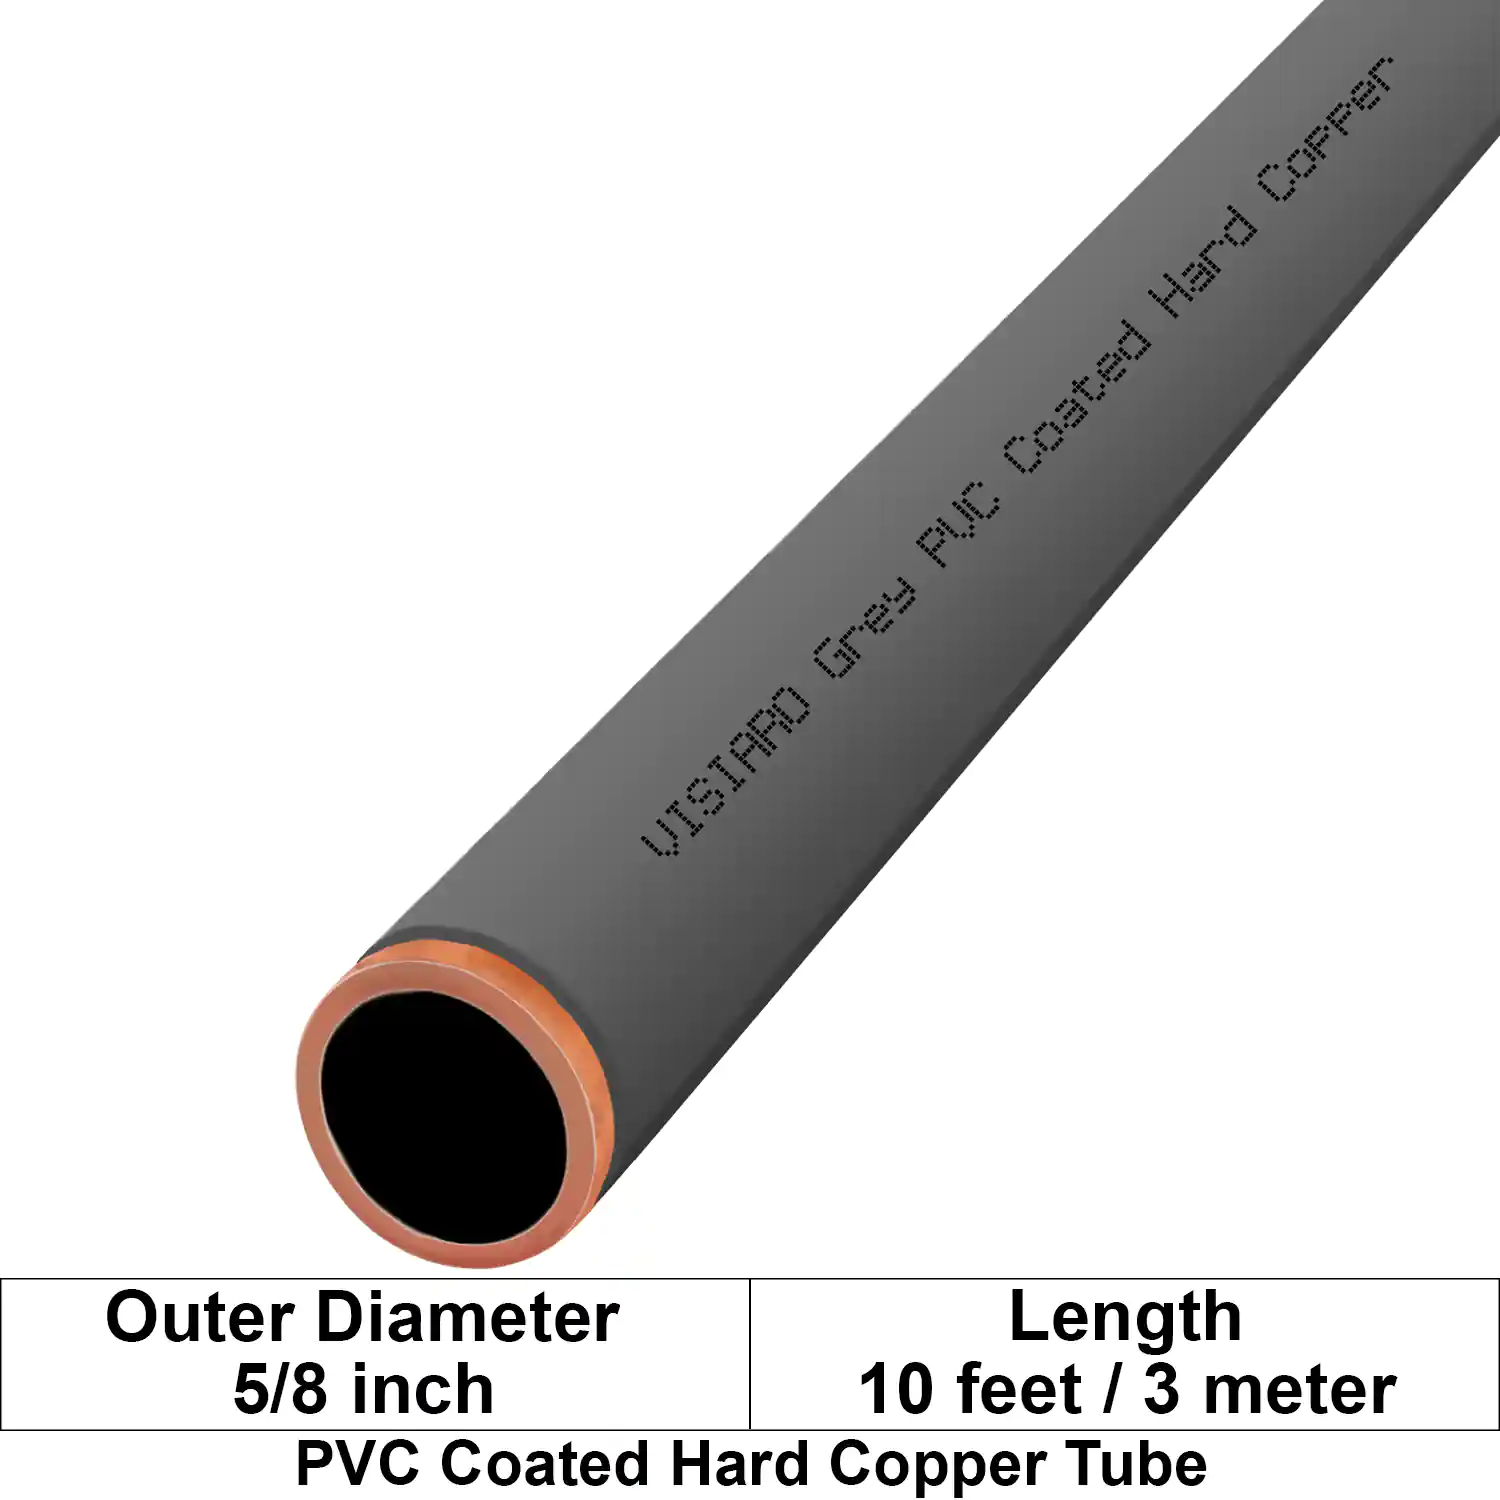 Visiaro Grey PVC Coated Hard Copper Tube 10ft long Outer Diameter - 5/8 inch